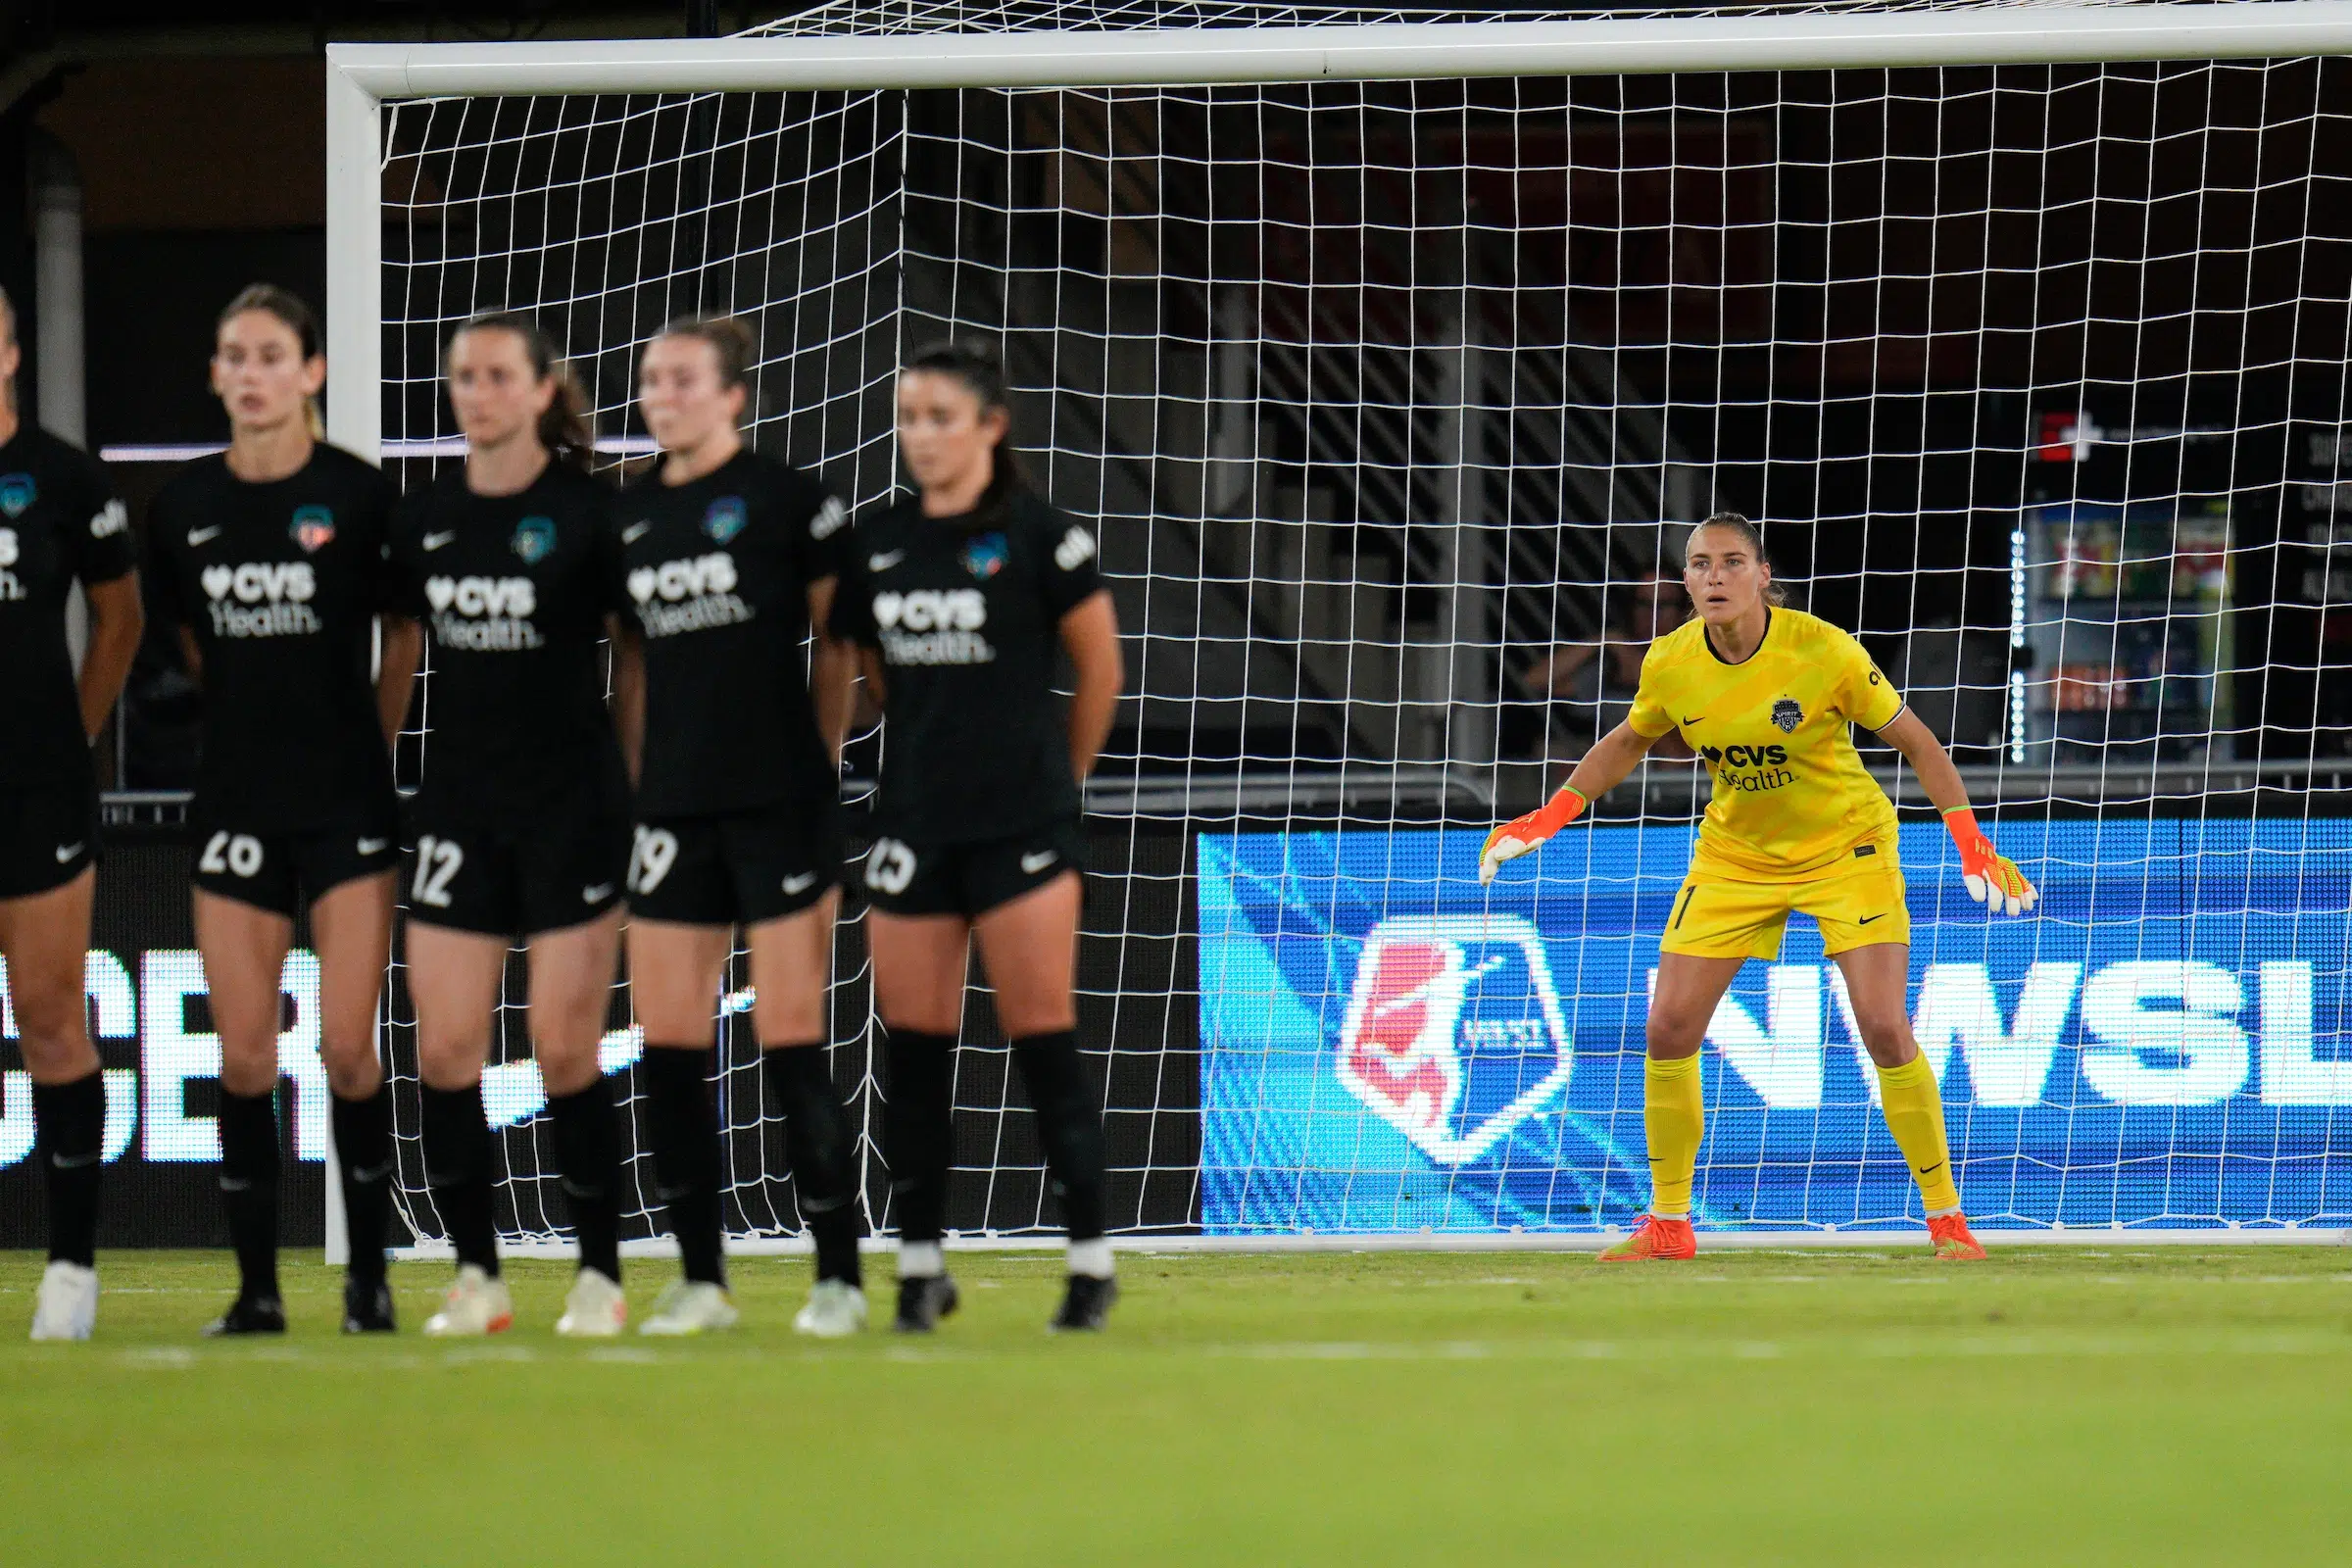 In focus in the background, Aubrey Kingsbury in a yellow uniform prepares for a free kick to be shot. In the foreground out of focus, five players in black uniforms form a wall to block the shot.